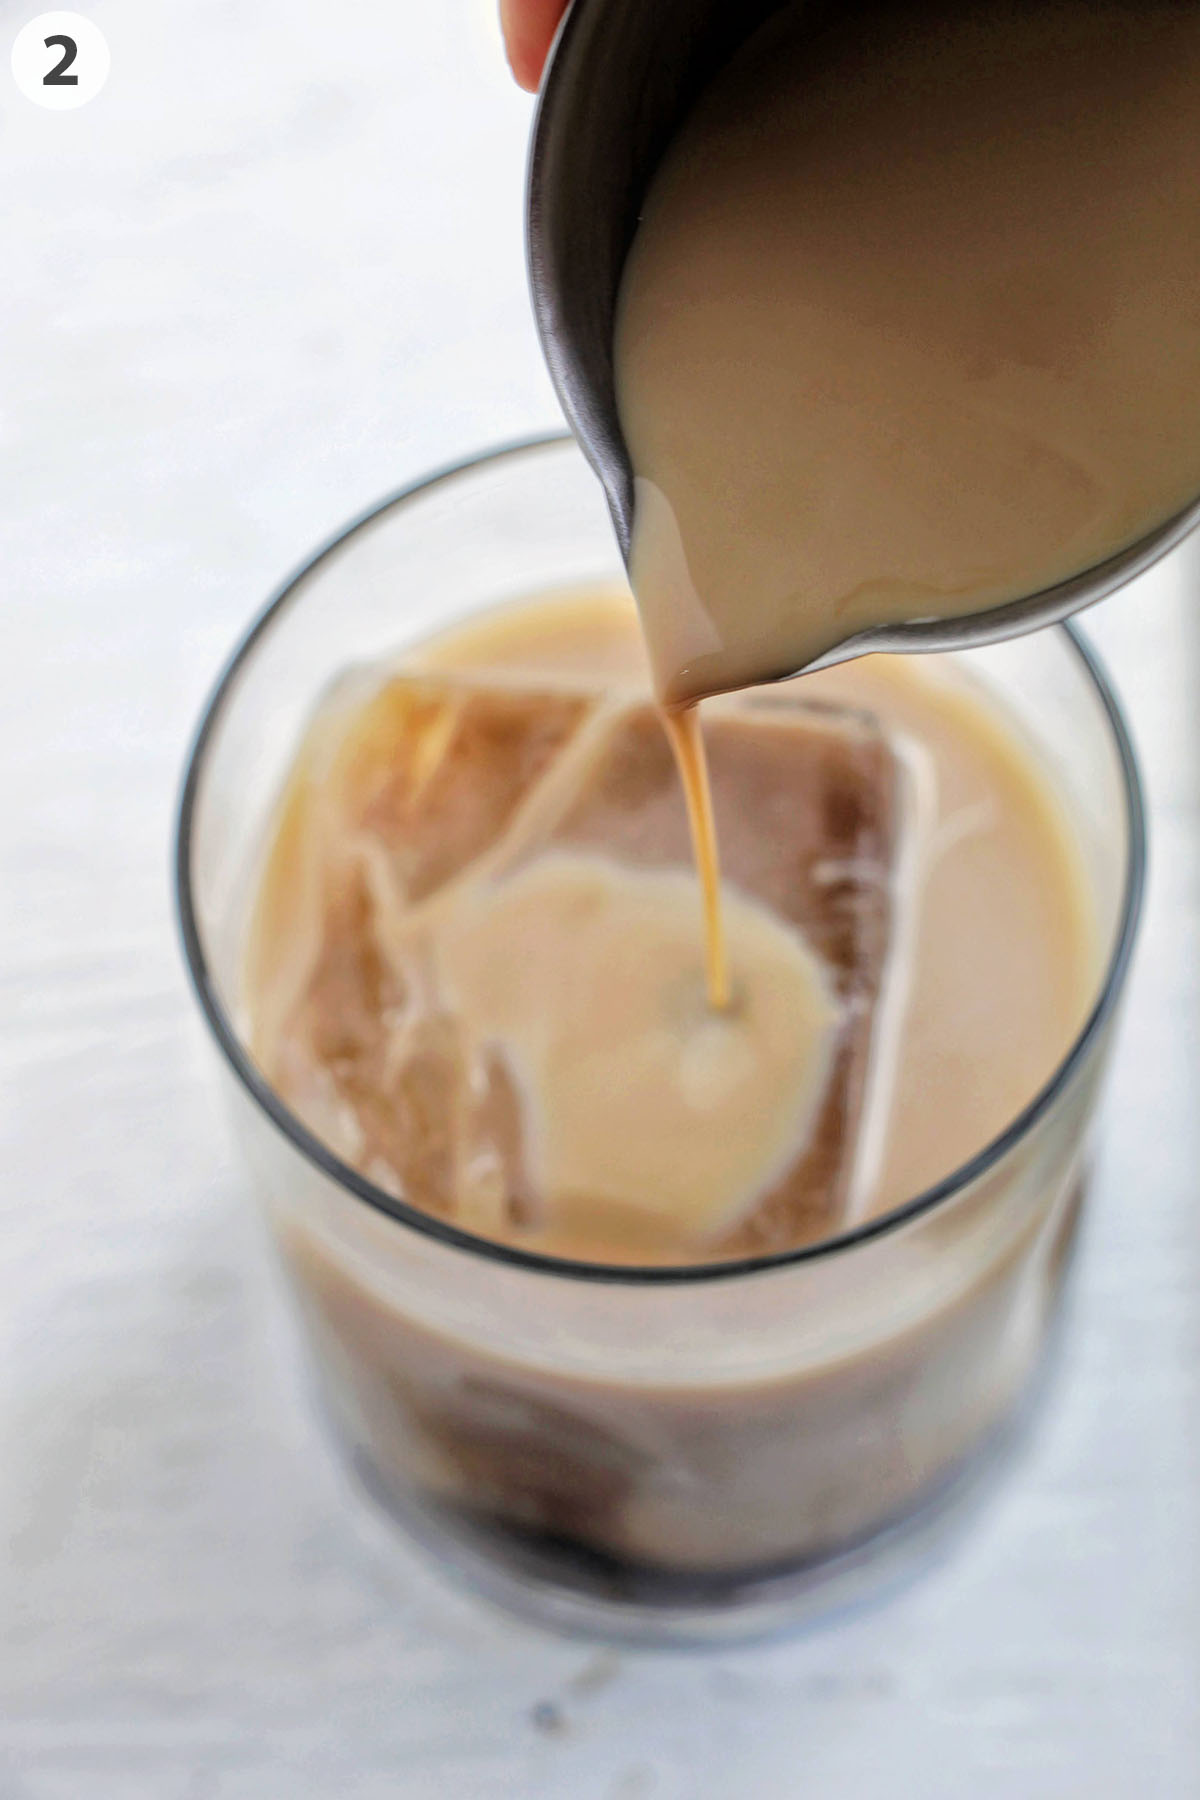 numbered photo pouring Baileys Irish cream into a lowball cocktail glass.